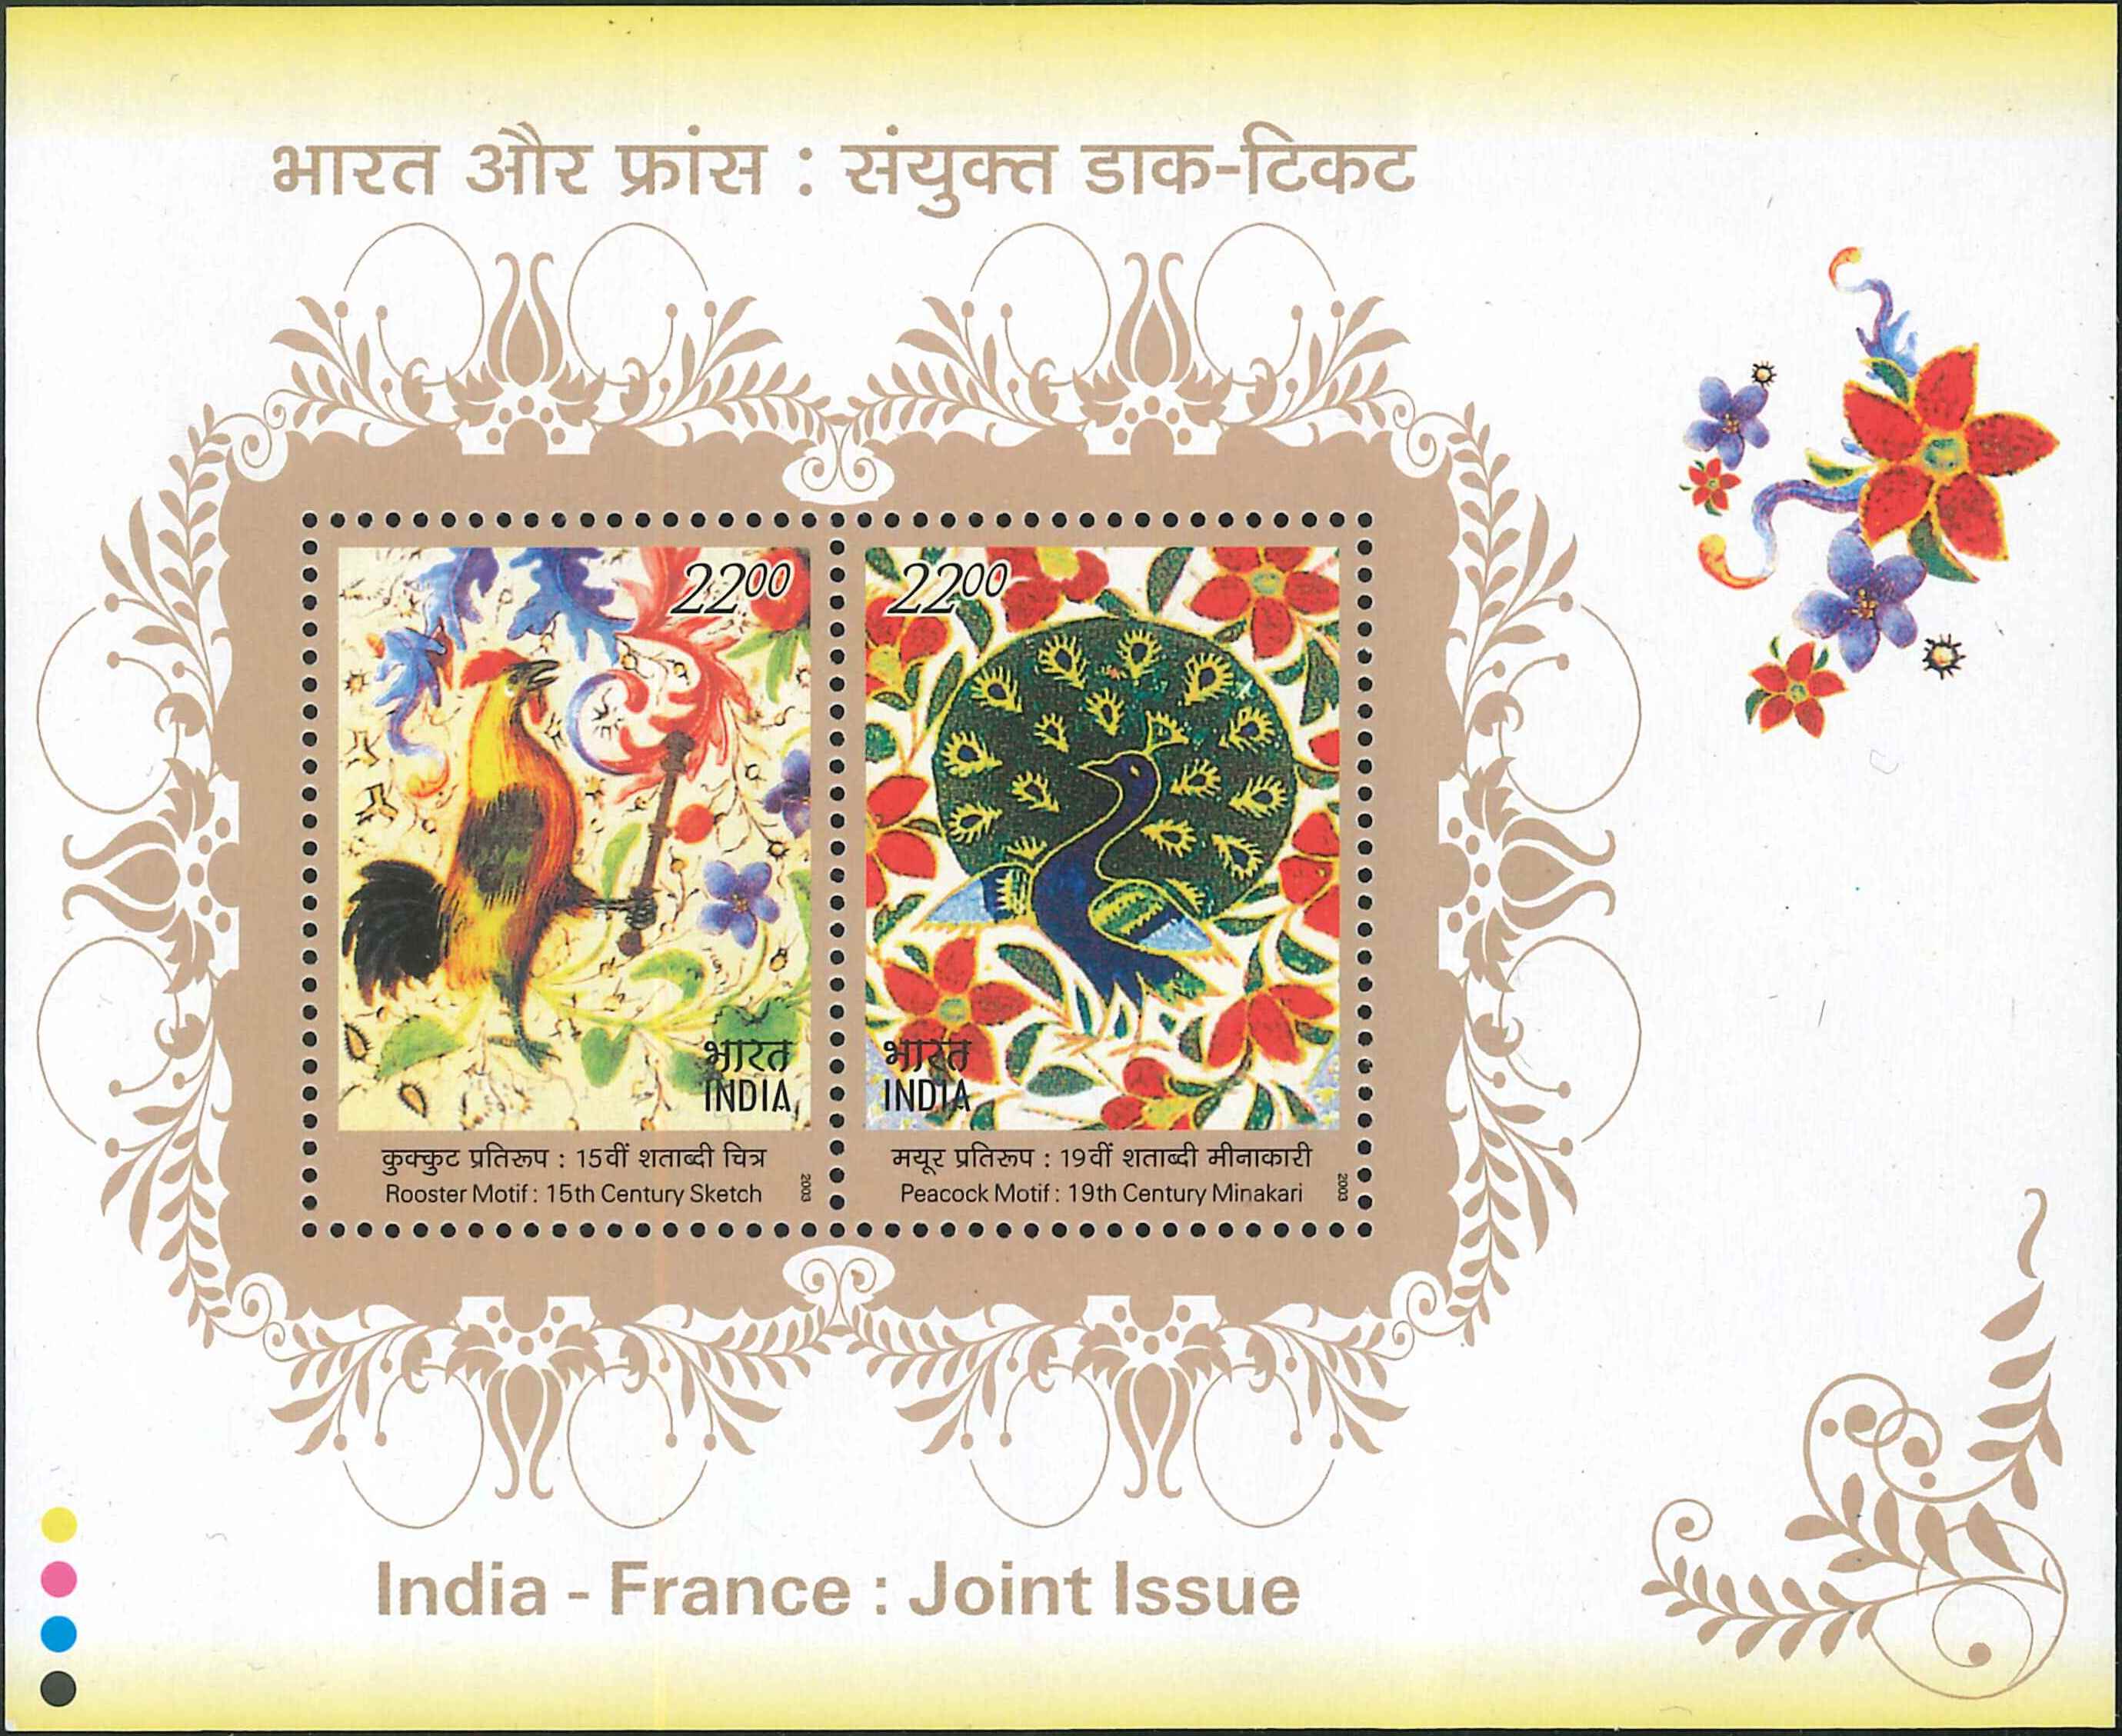 Rooster (France) and Peacock (India) Motif